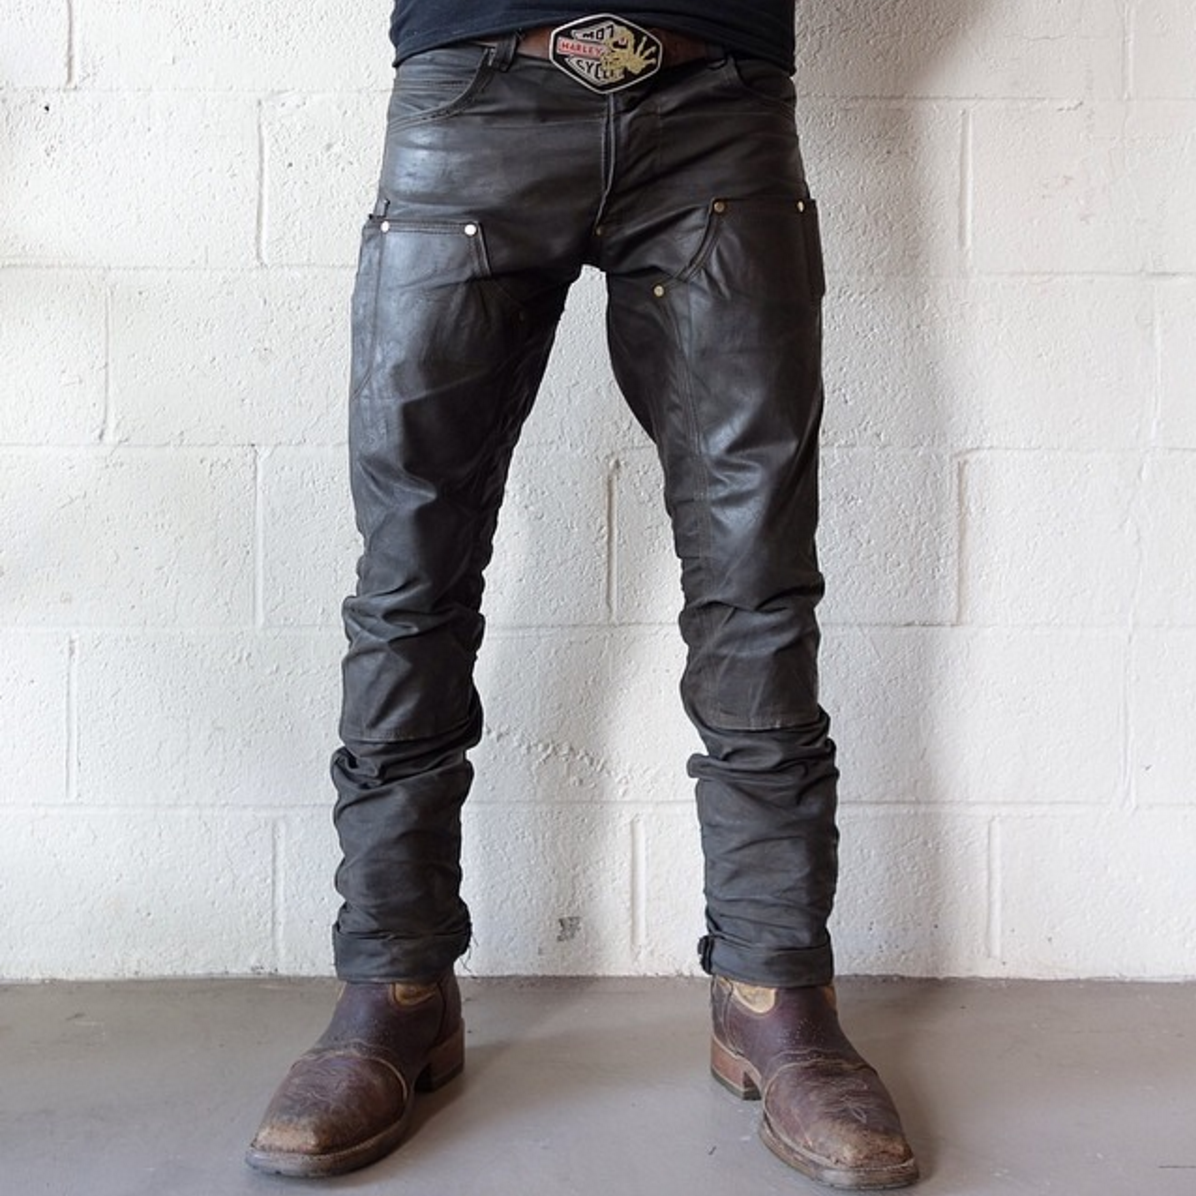 Waxed Canvas Work Pant, Fitted work pant, waxed canvas pants, pants made in usa, made in Portland Oregon, durable pants, best waxed canvas pants, slim fit work pant, red clouds pants, waxed cotton pants, pants made to last